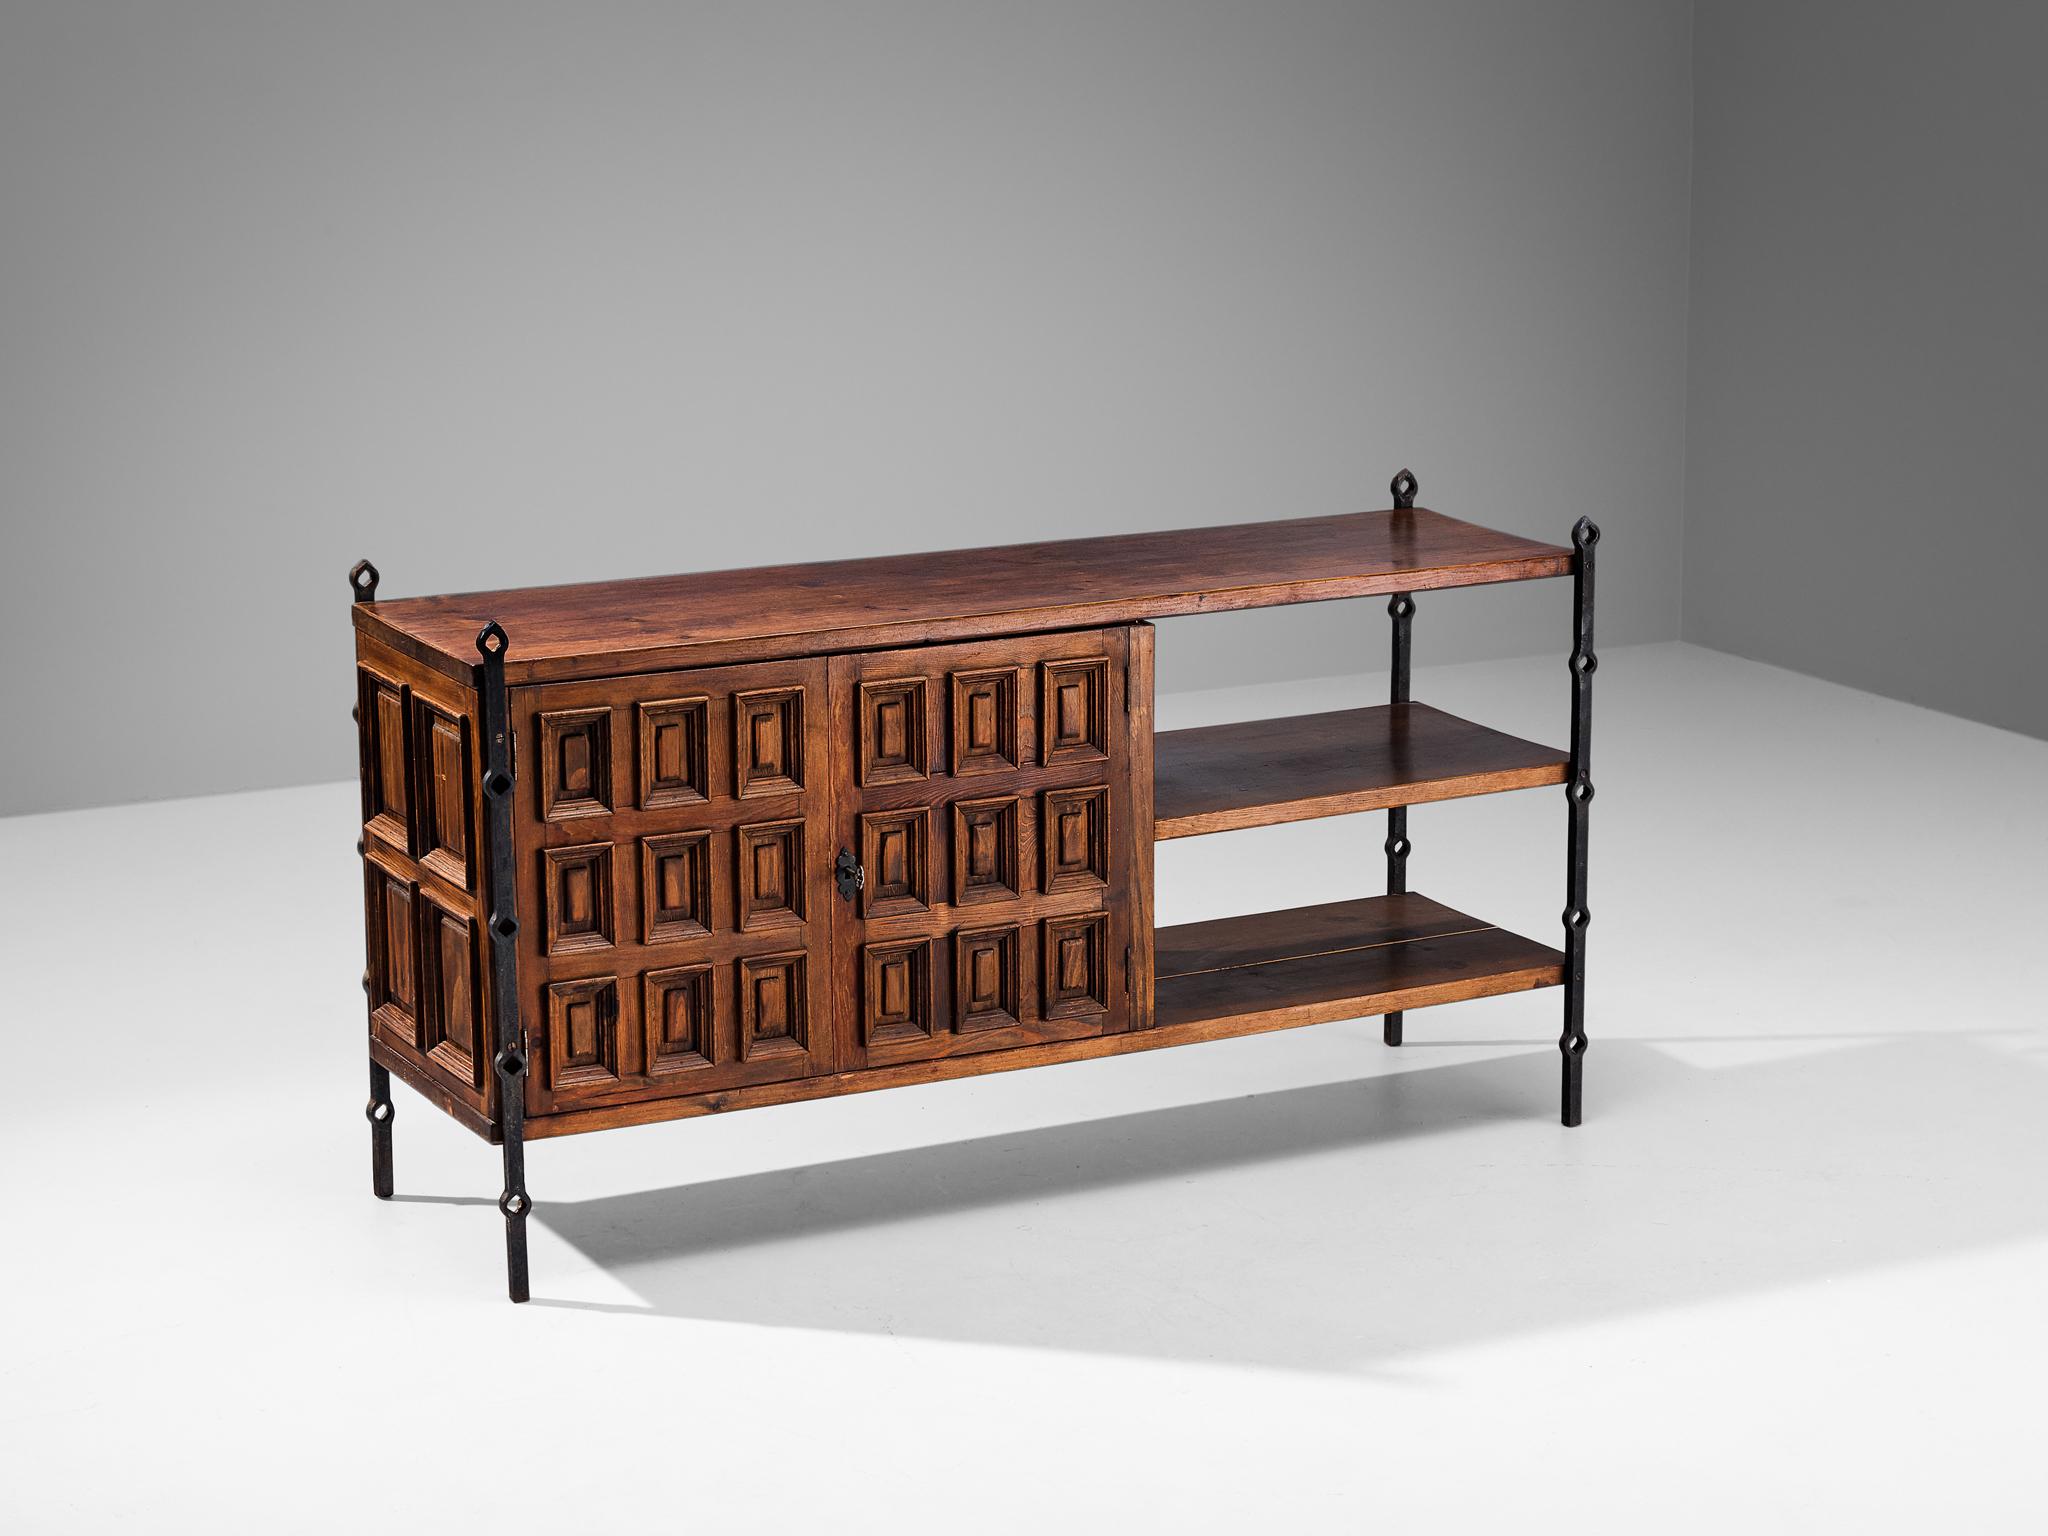 Sideboard, stained pine, iron, Spain, 1950s.

This cabinet originates from Spain and shows the decorative characteristics of the 16th century castilian furniture design. The corpus consists of a compartment with graphic designed door panels